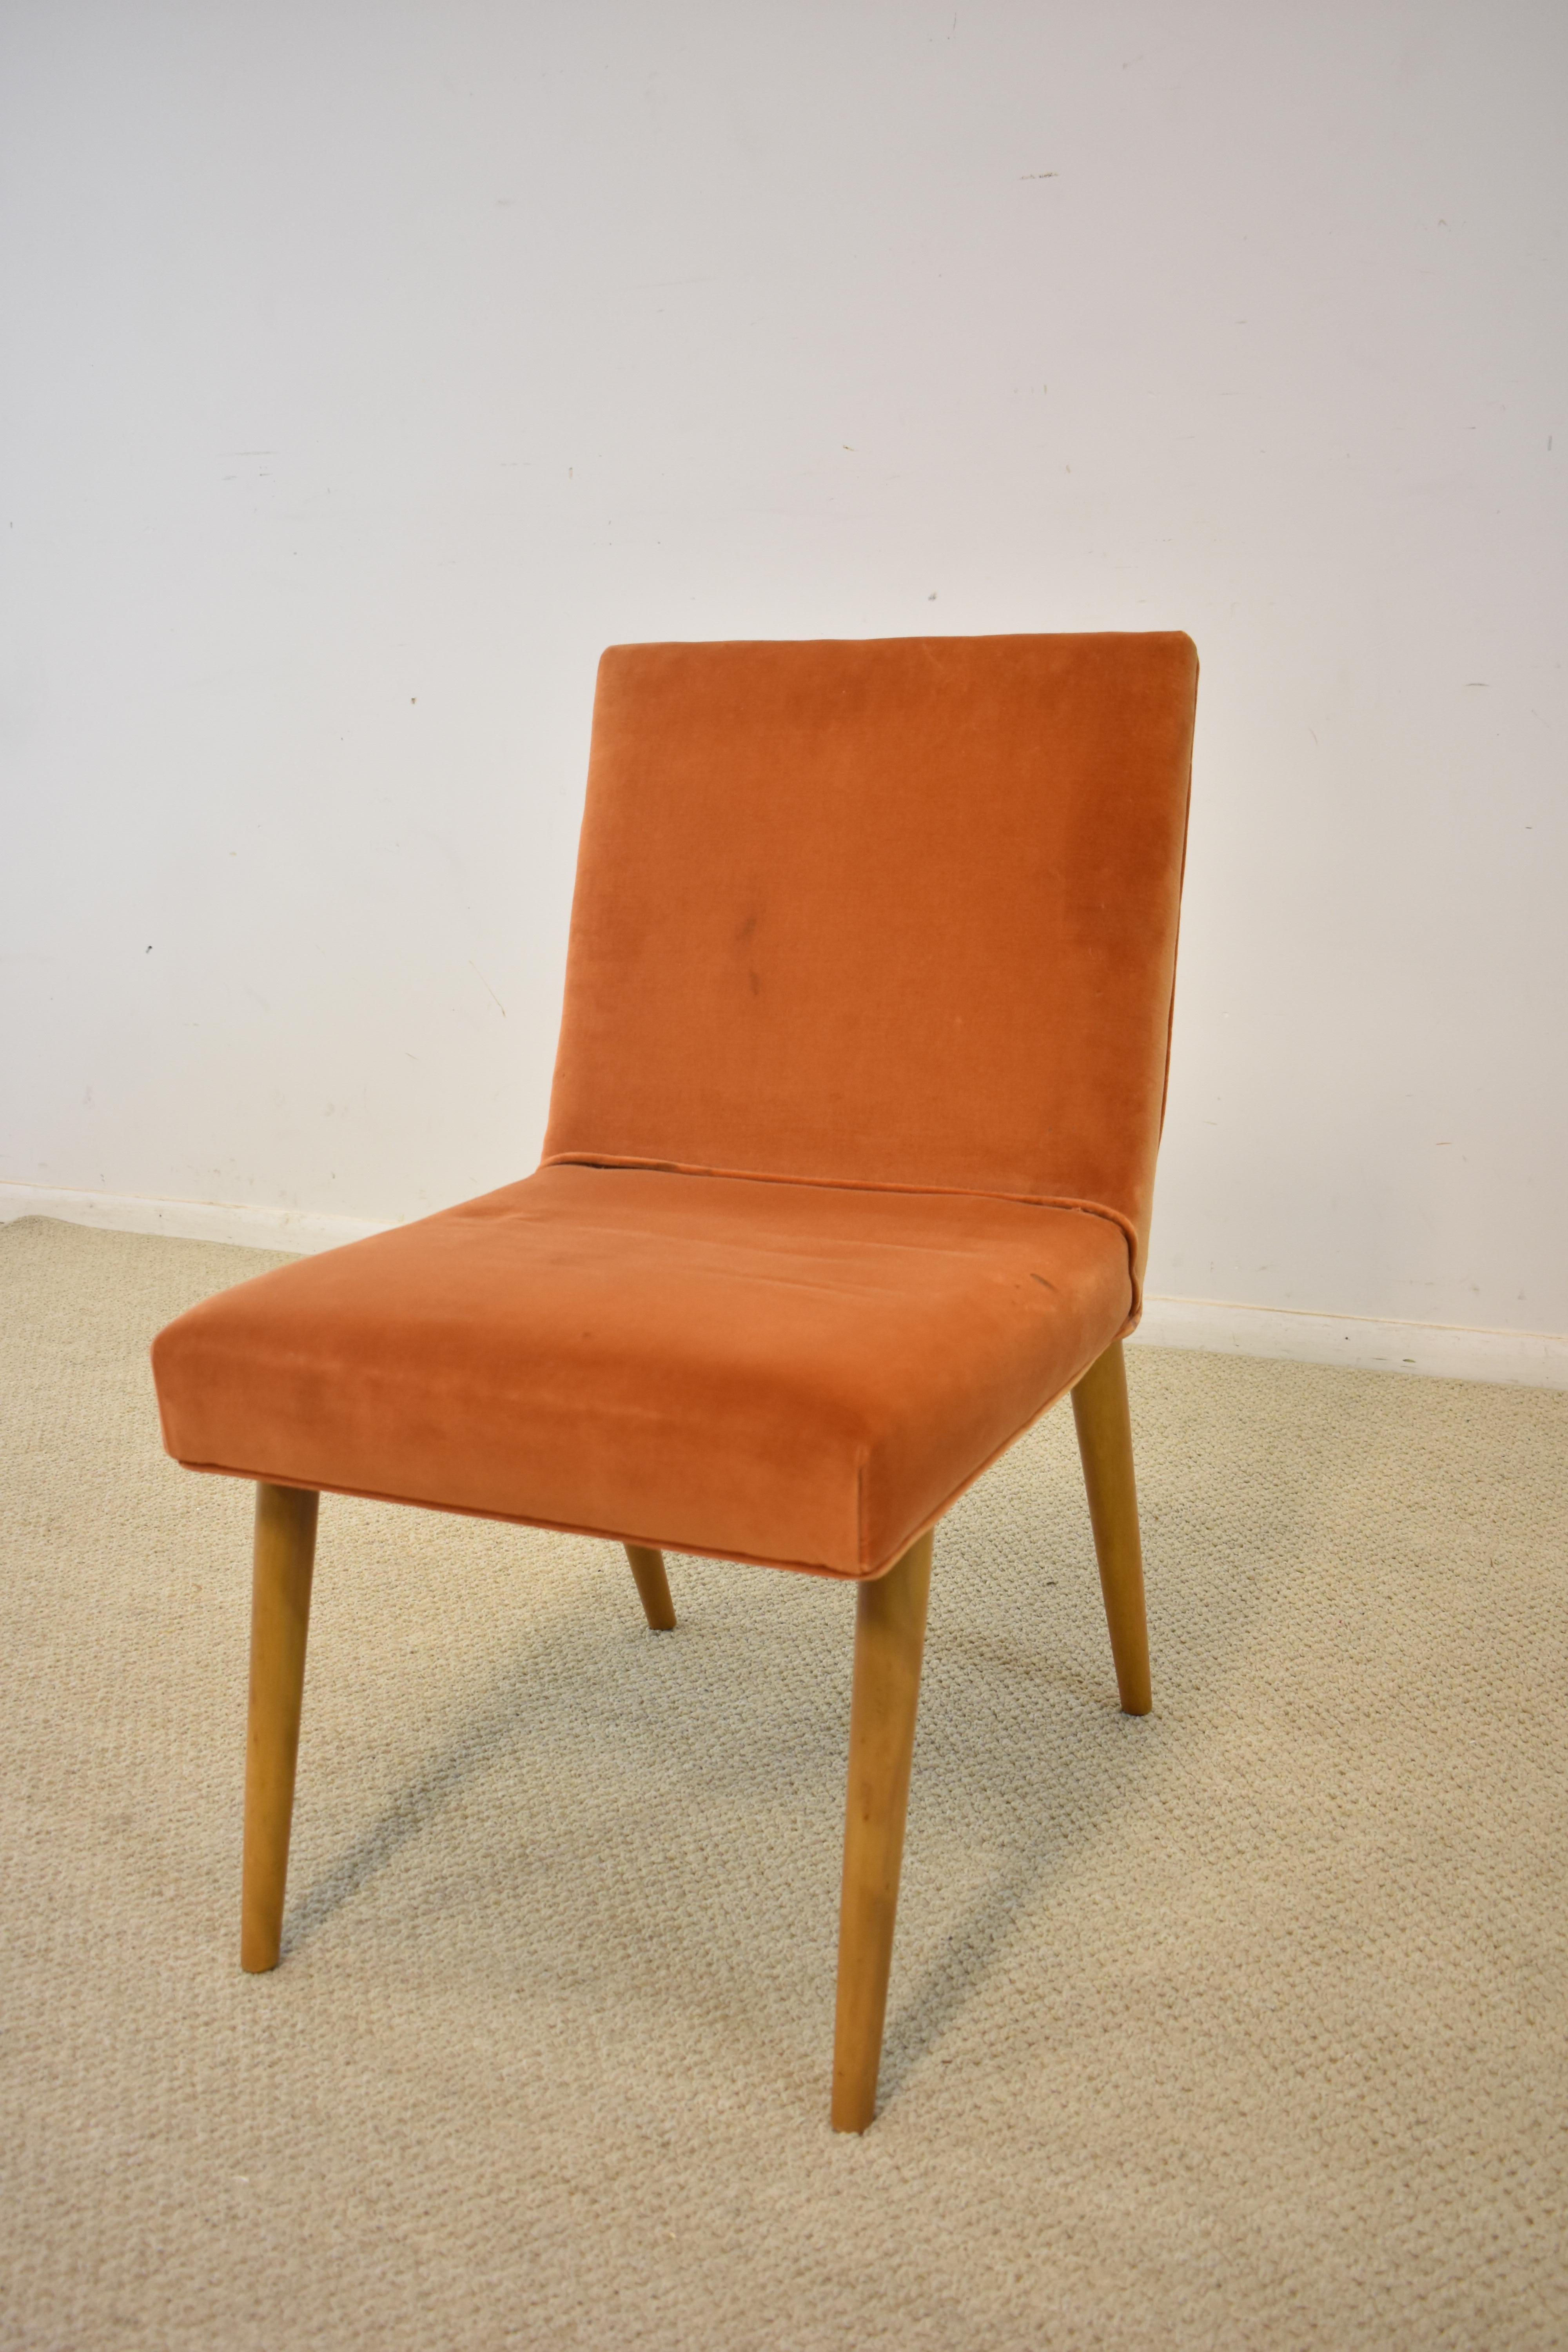 Eight teak frame upholstered dining chairs by Widdicomb designed by T.H. Rbsjohn & Gibbings. Six upholstered alike two coordinating fabric chairs. Can use cleaning or new upholstery. Very nice condition. Dimensions: 24